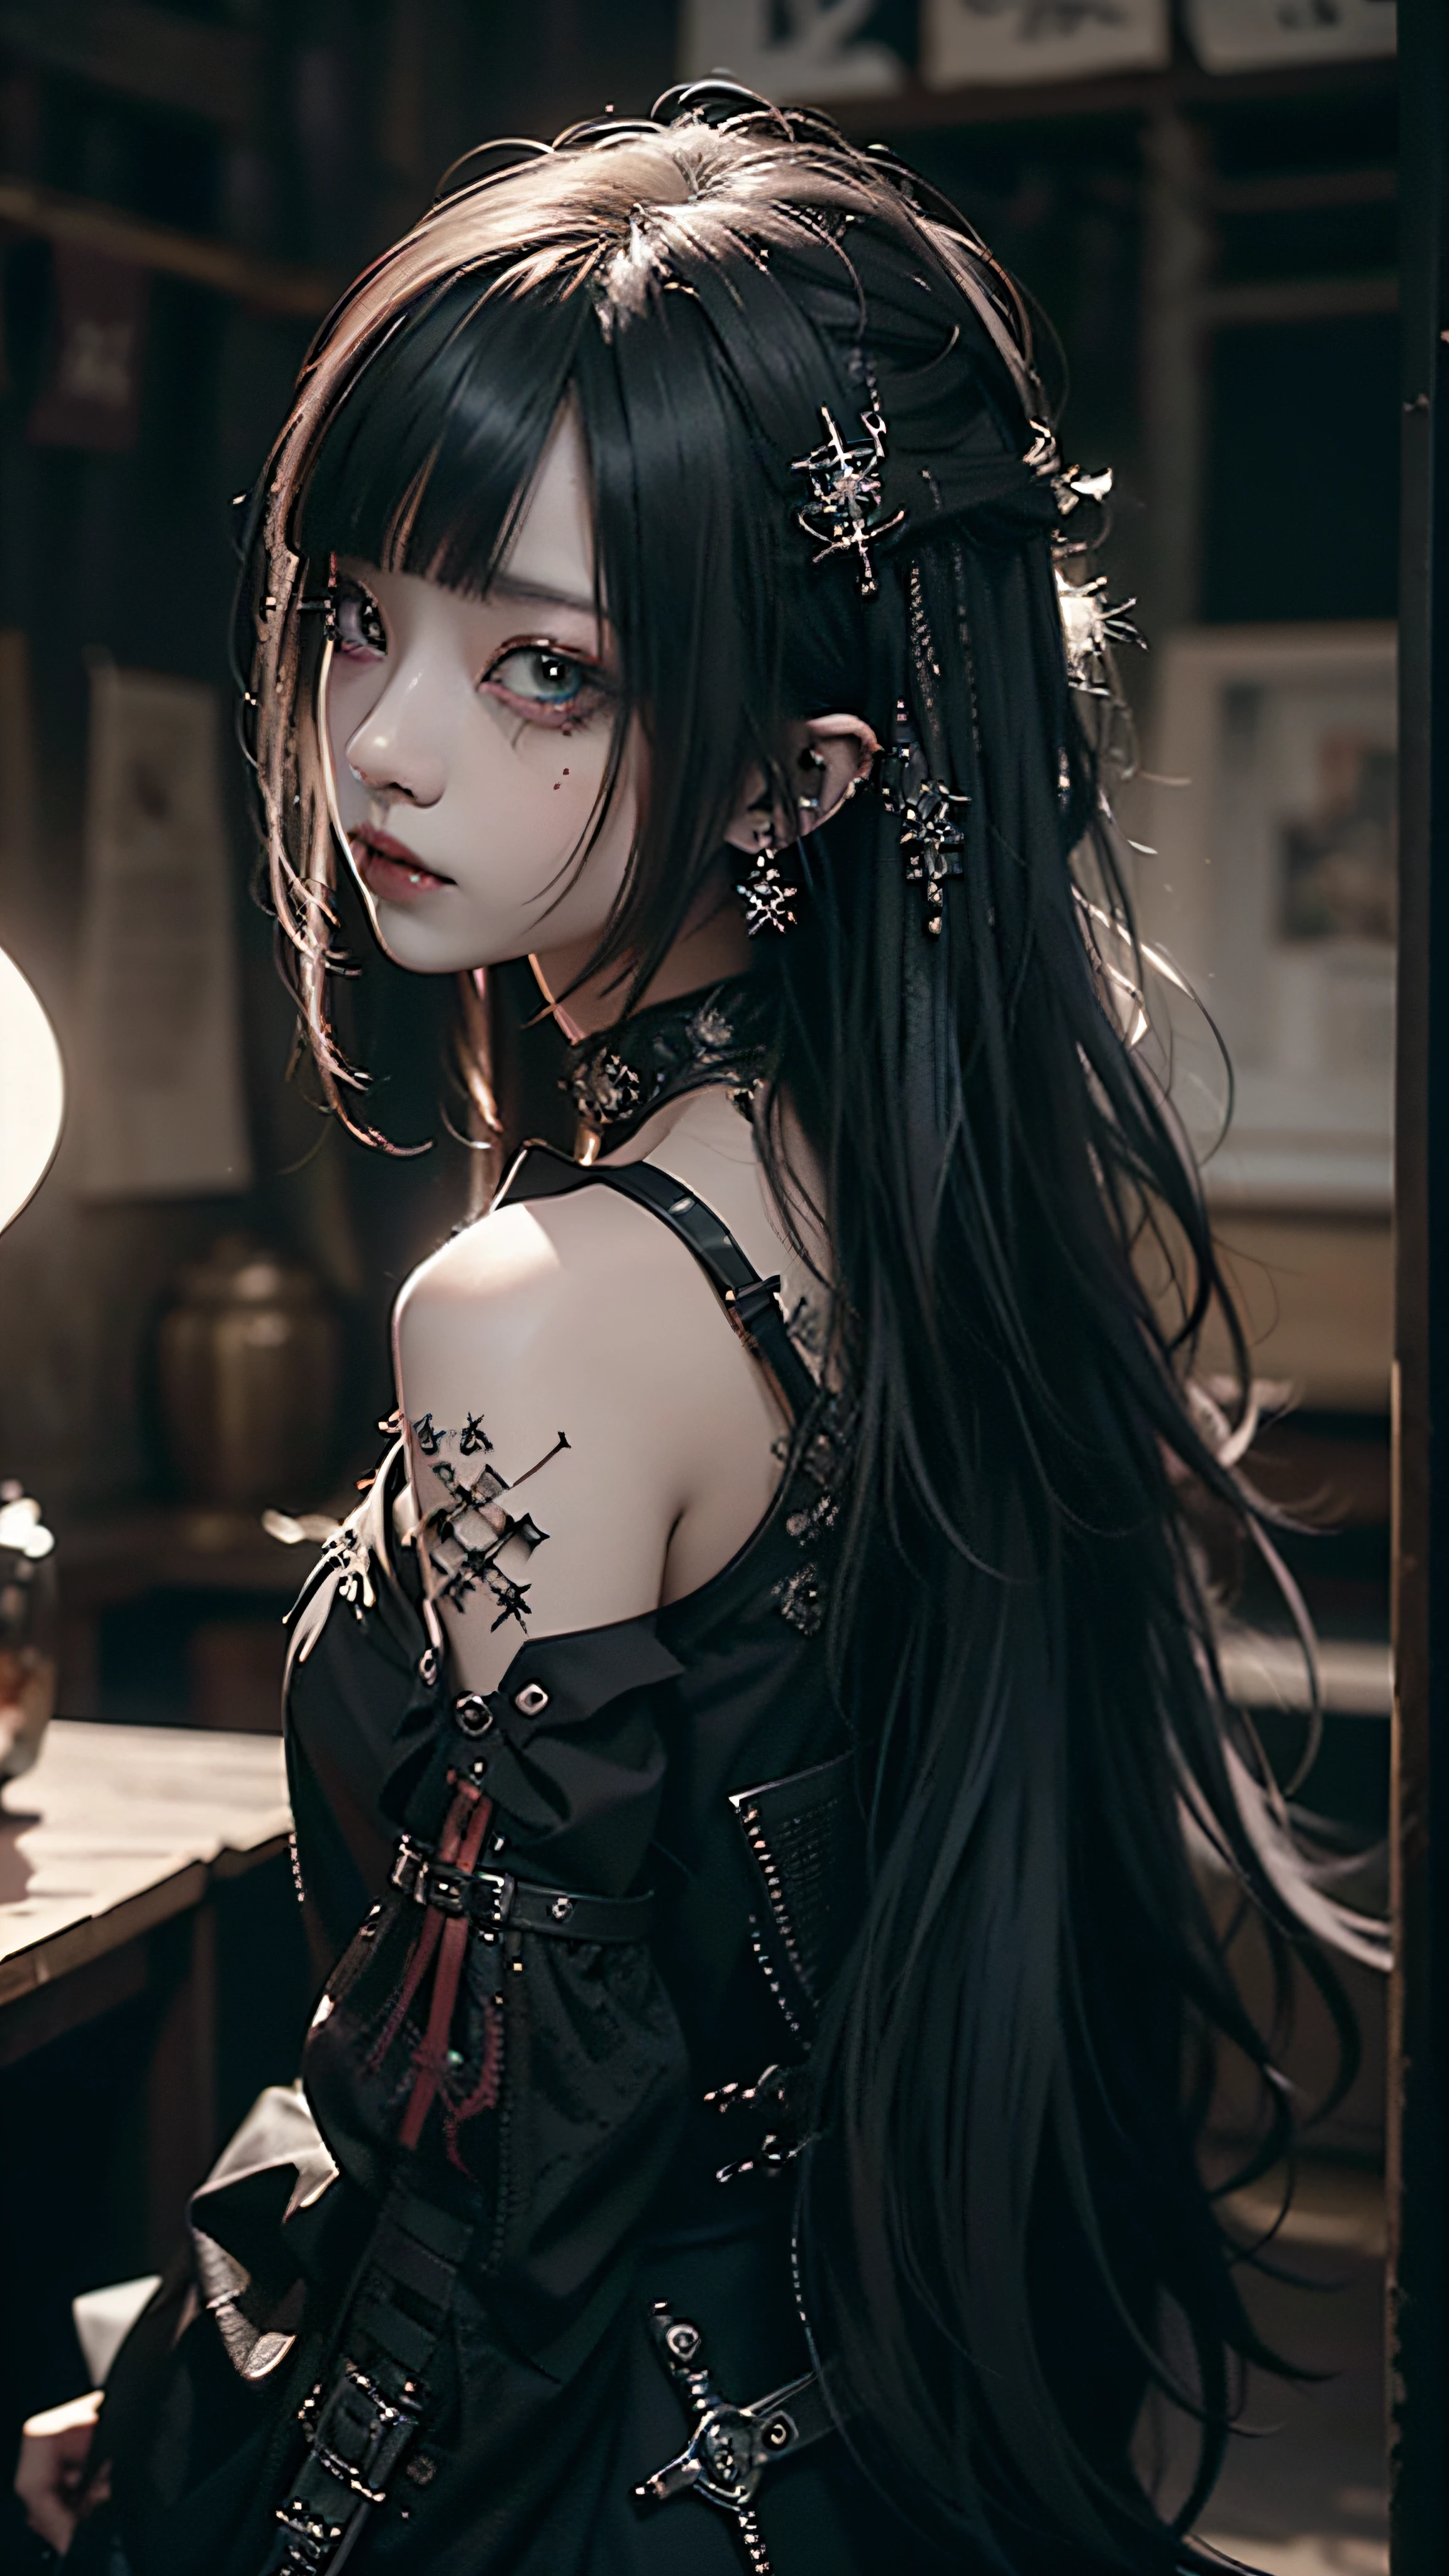 top-quality、8K、​masterpiece：1.3、Gothic punk、Red inner color、A dark-haired、hair adornments、a beauty girl、creative、dark fantasy style、Neogos、Goth Fashion：1.2、hight resolution、​masterpiece、top-quality、headw:1.3、((Hasselblad photo))、Fine-grained skin、Sharp Focus、(lighting like a movie)、Realistic texture m hair